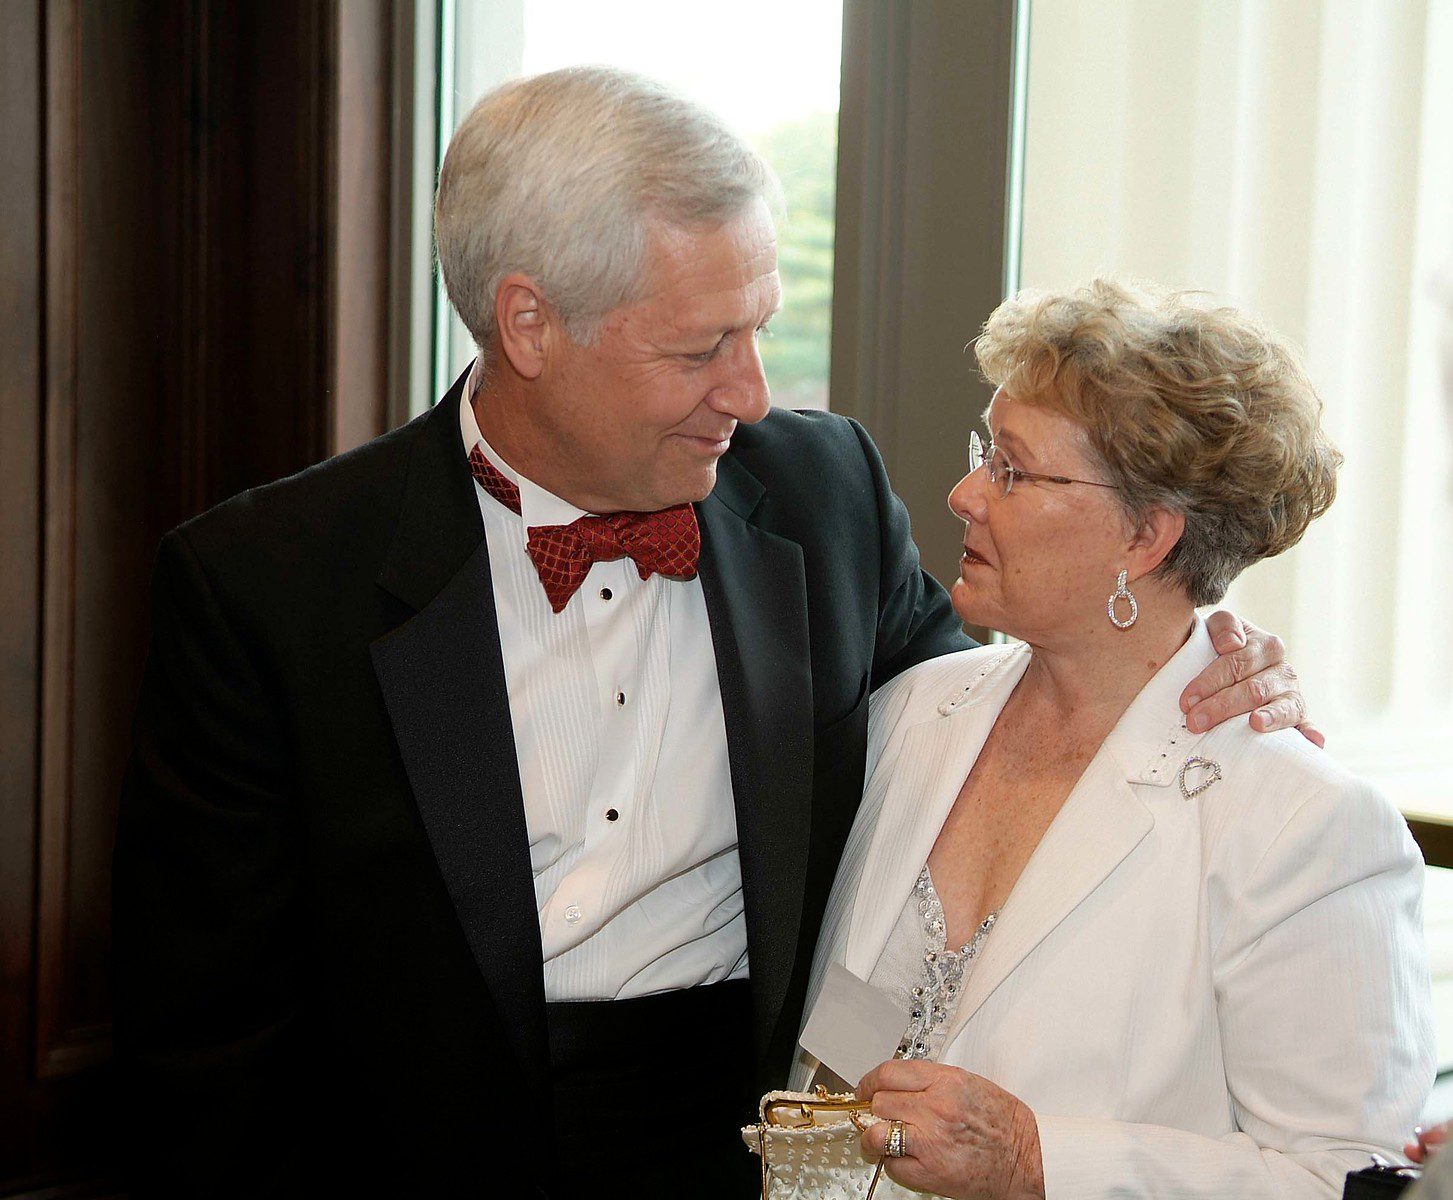 Dr. Fisher and Helen Kennedy